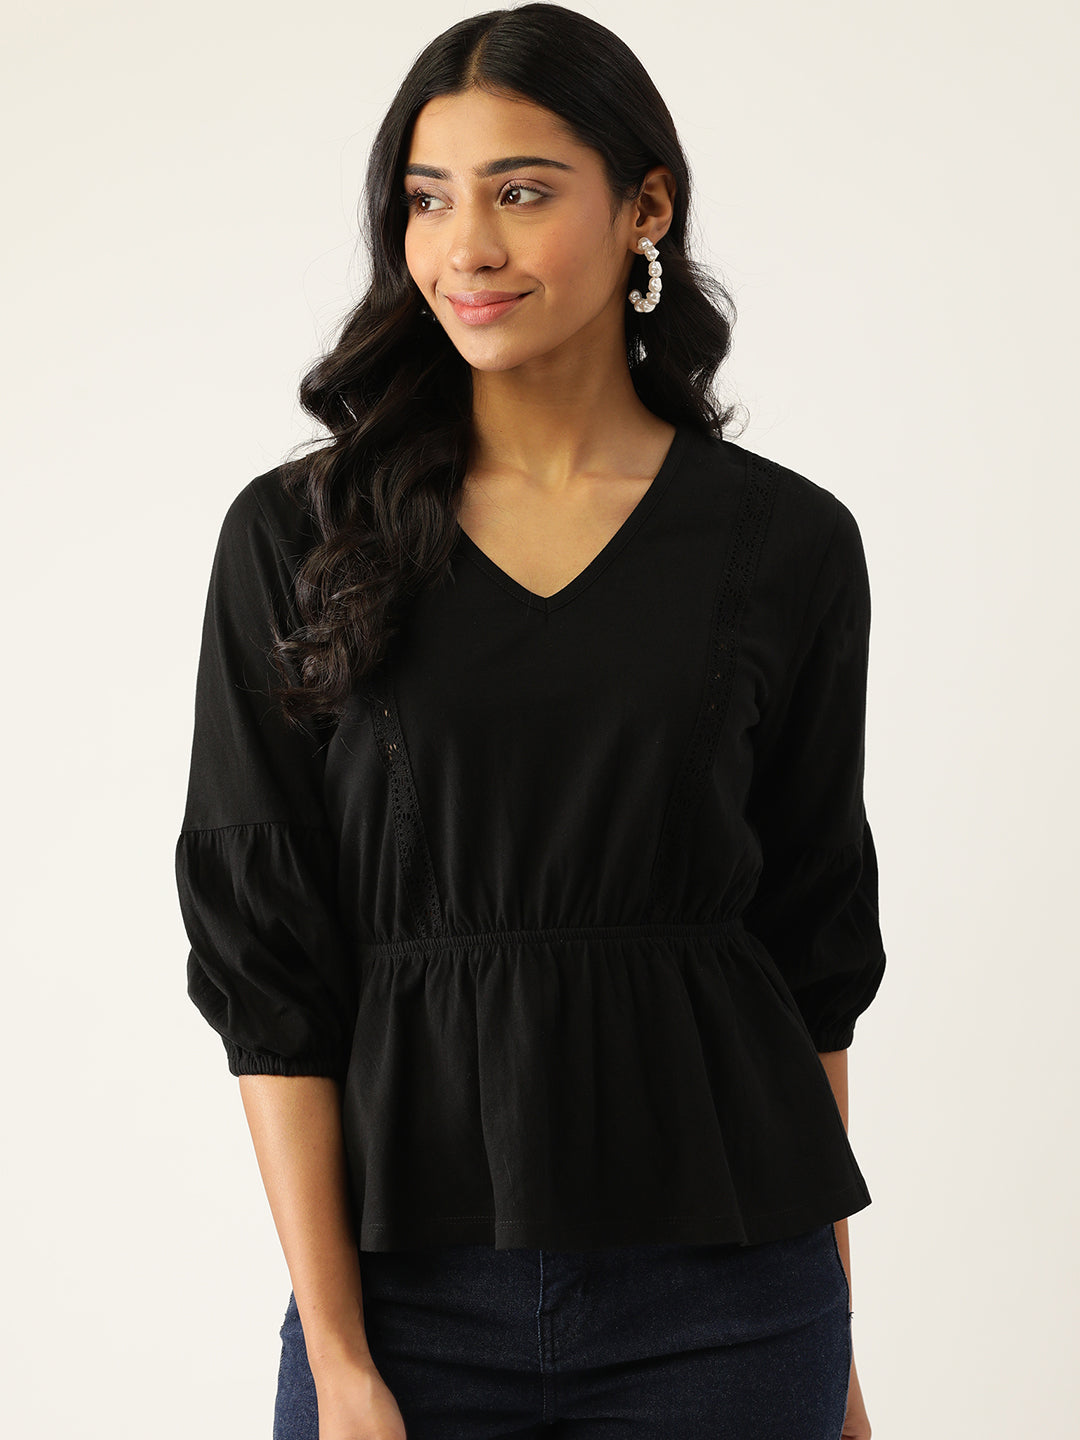 Black Solid Cinched Waist Top